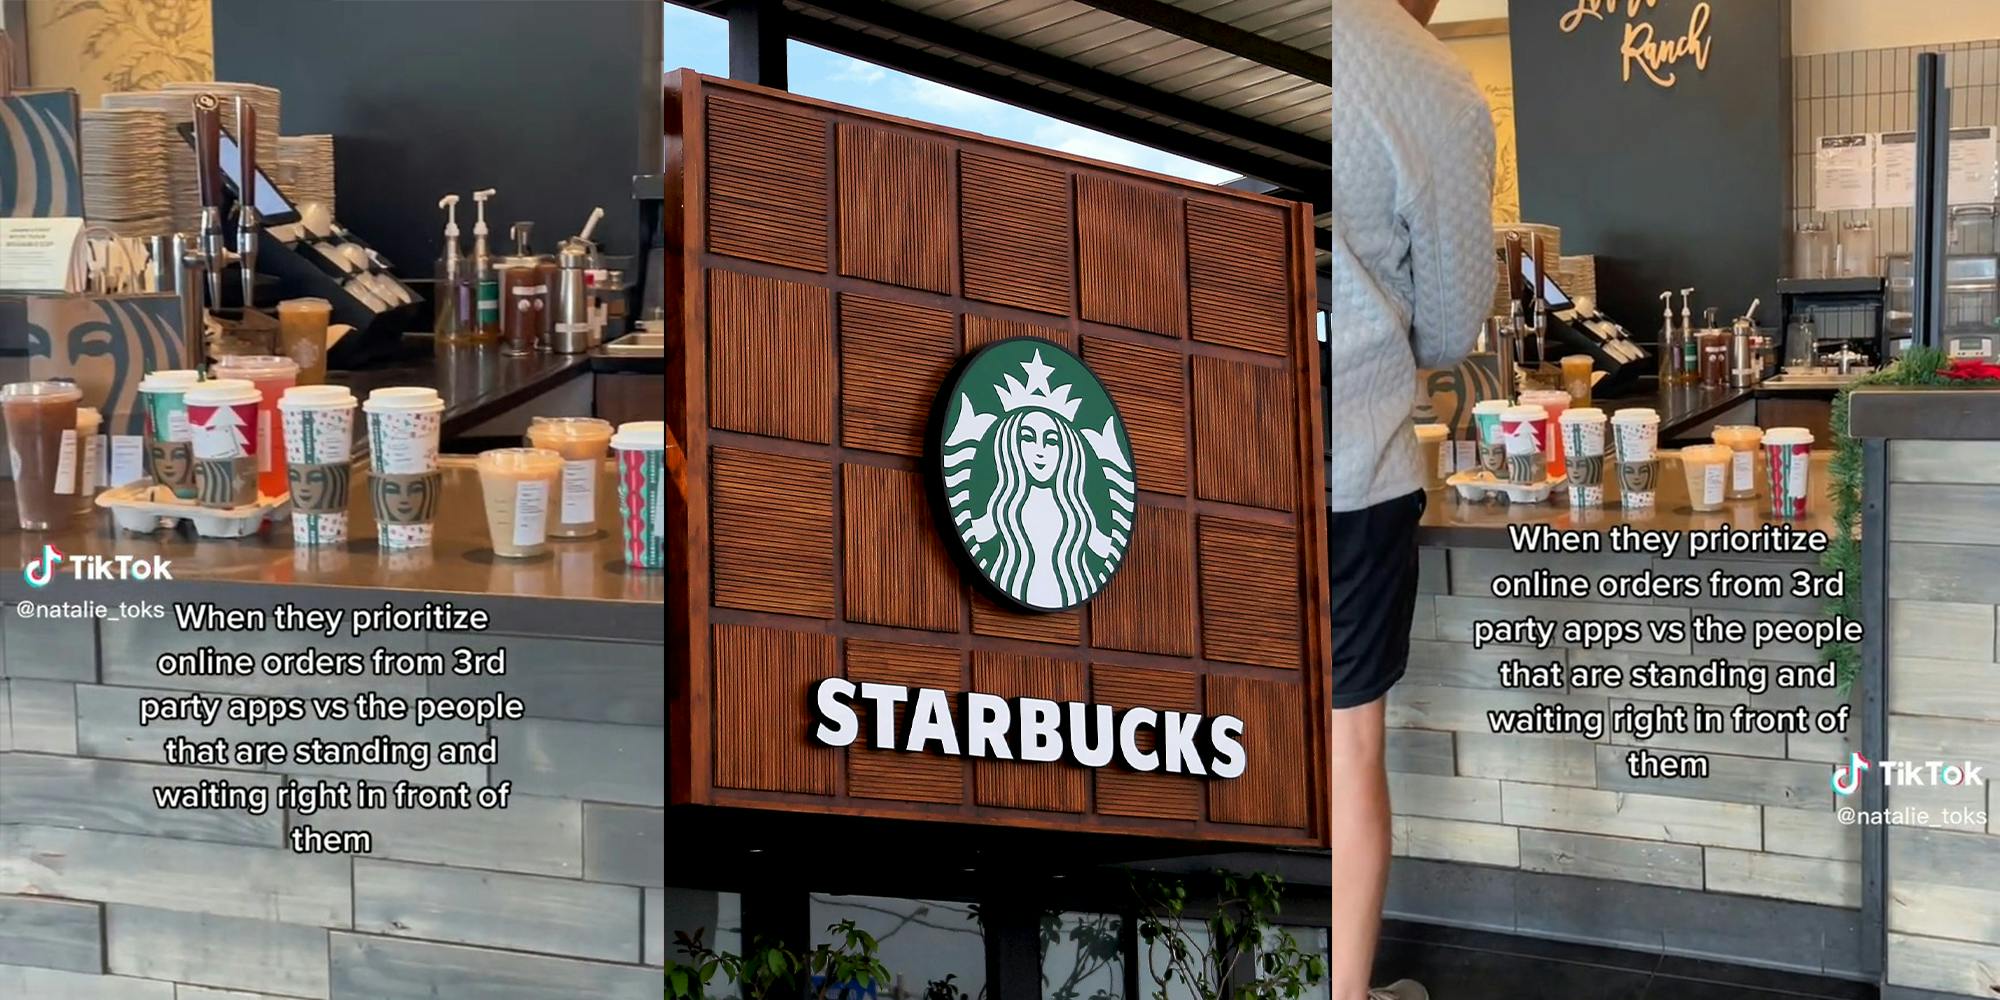 Customer calls out Starbucks for prioritizing mobile orders over people standing in line